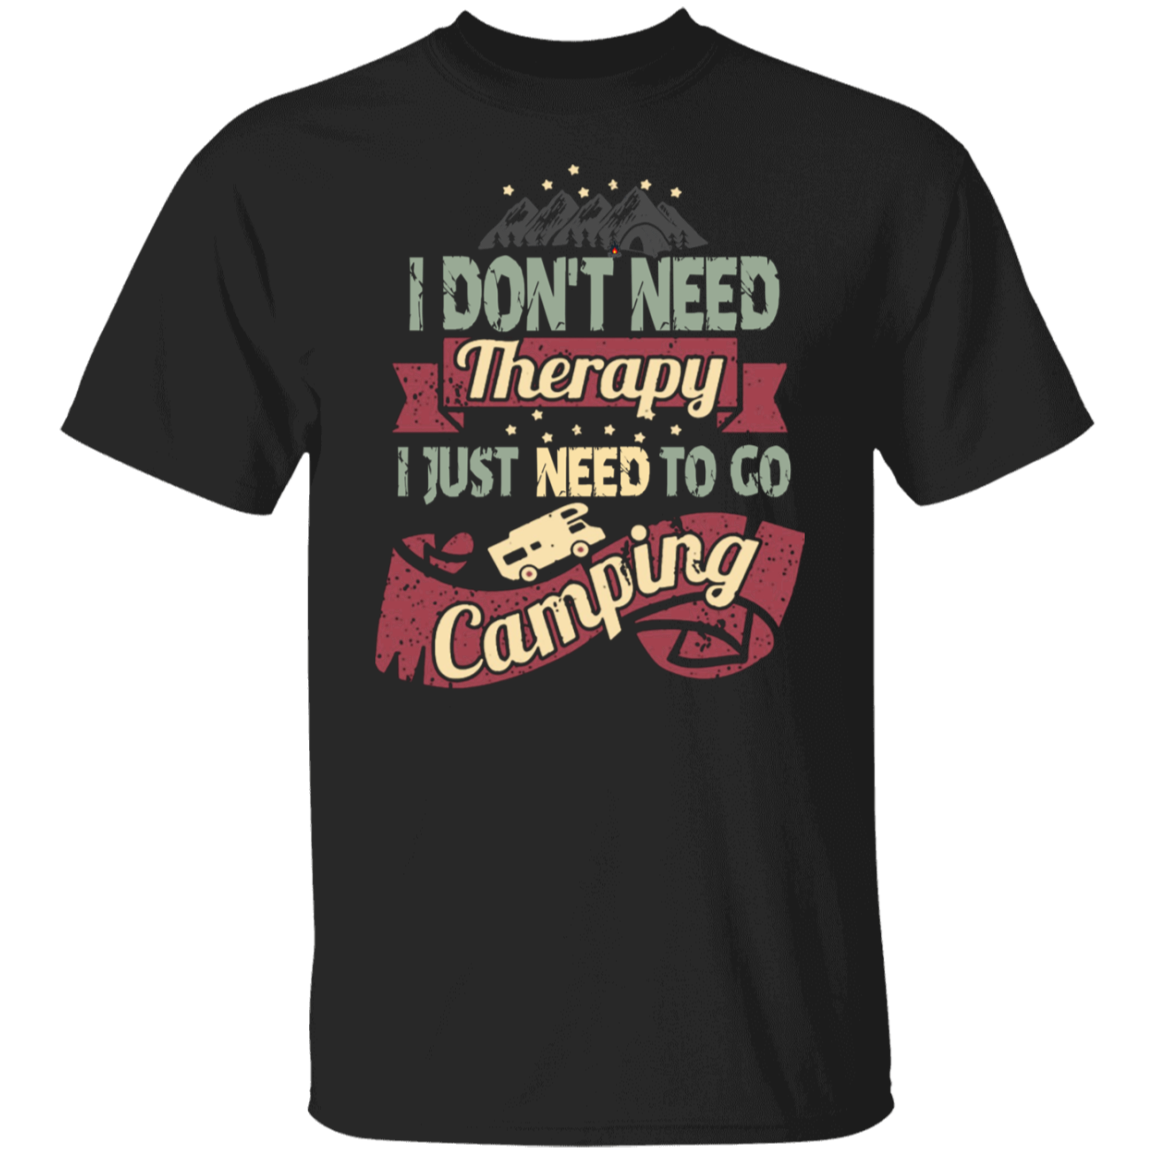 I Don't Need Therapy Need to Go Camping Unisex T-Shirt, Sweatshirt, Hoodie